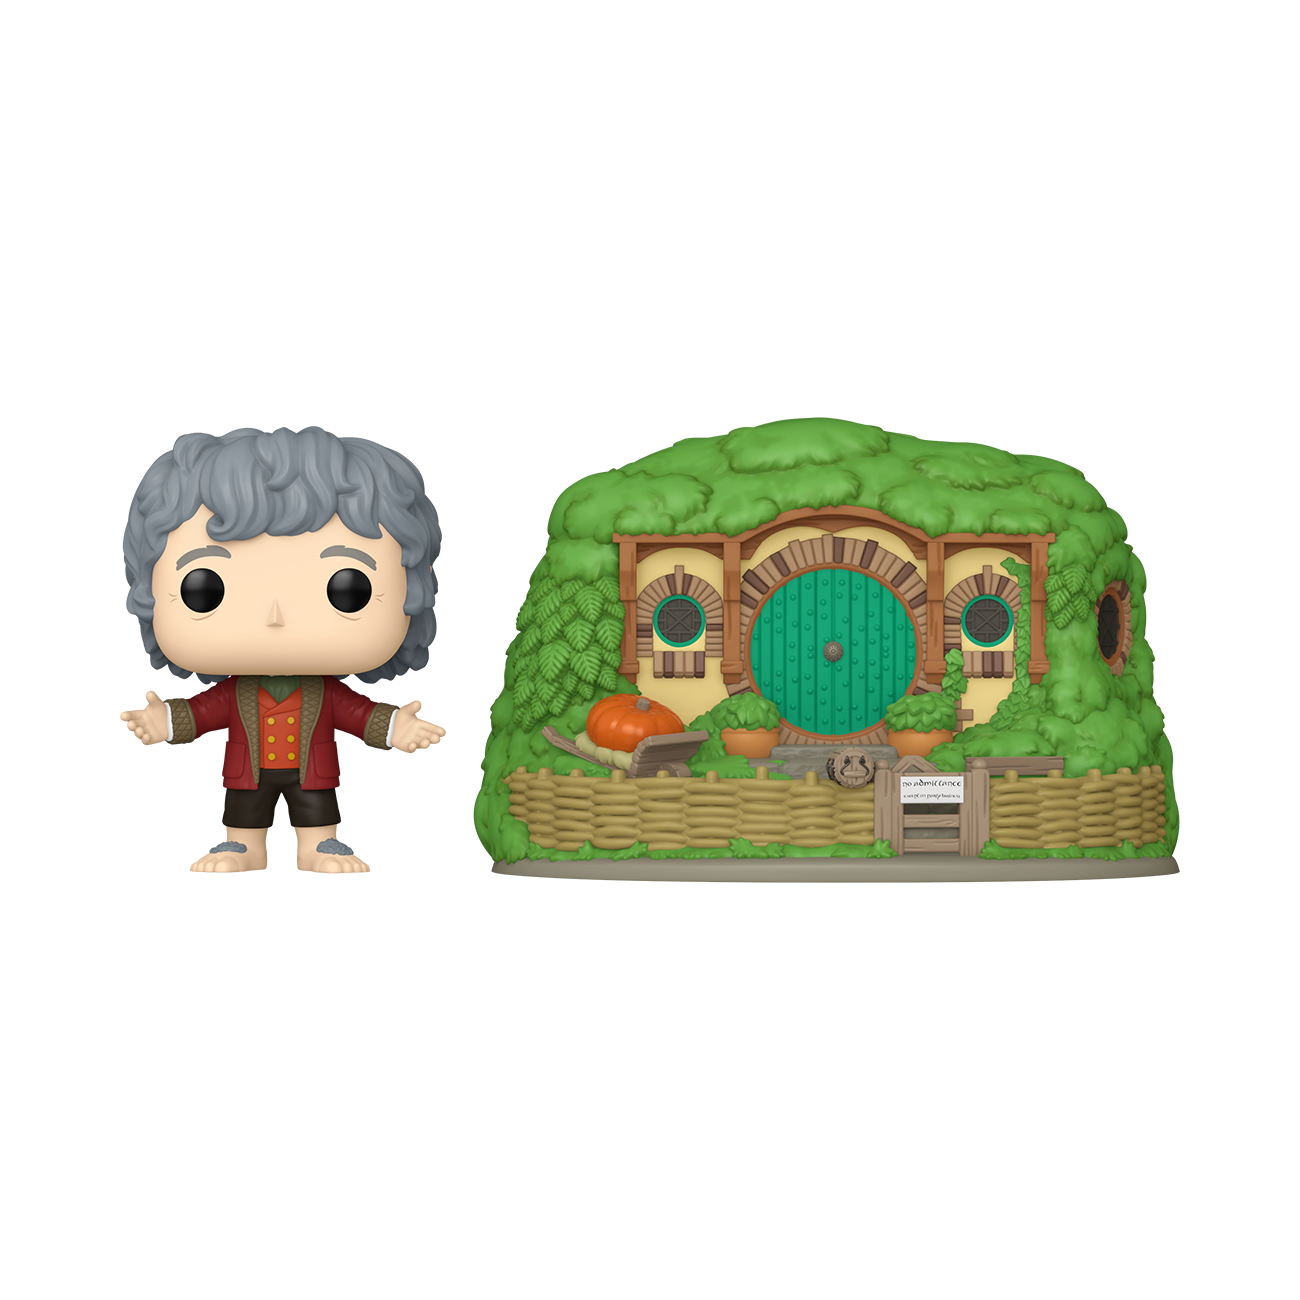 Funko Bilbo Baggins With Bag-End - The Lord Of The Rings Pop! Town